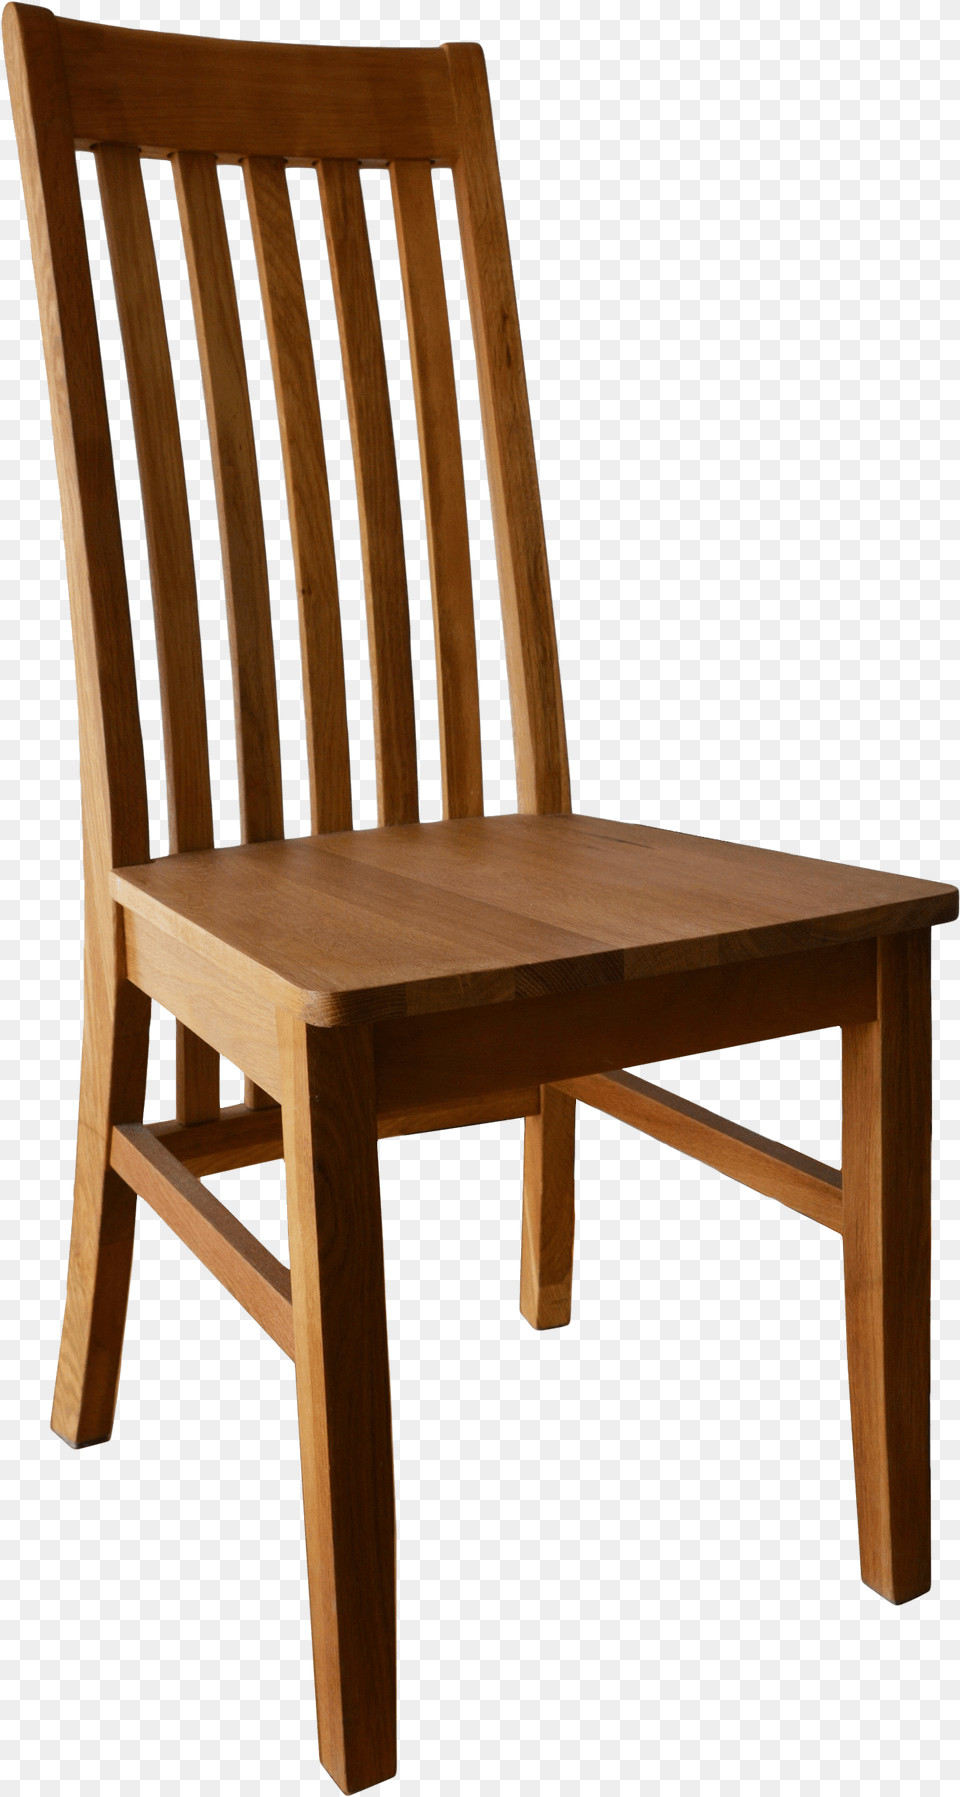 Wooden Kitchen Chair Image Wooden Chair Transparent Background, Furniture, Wood Png